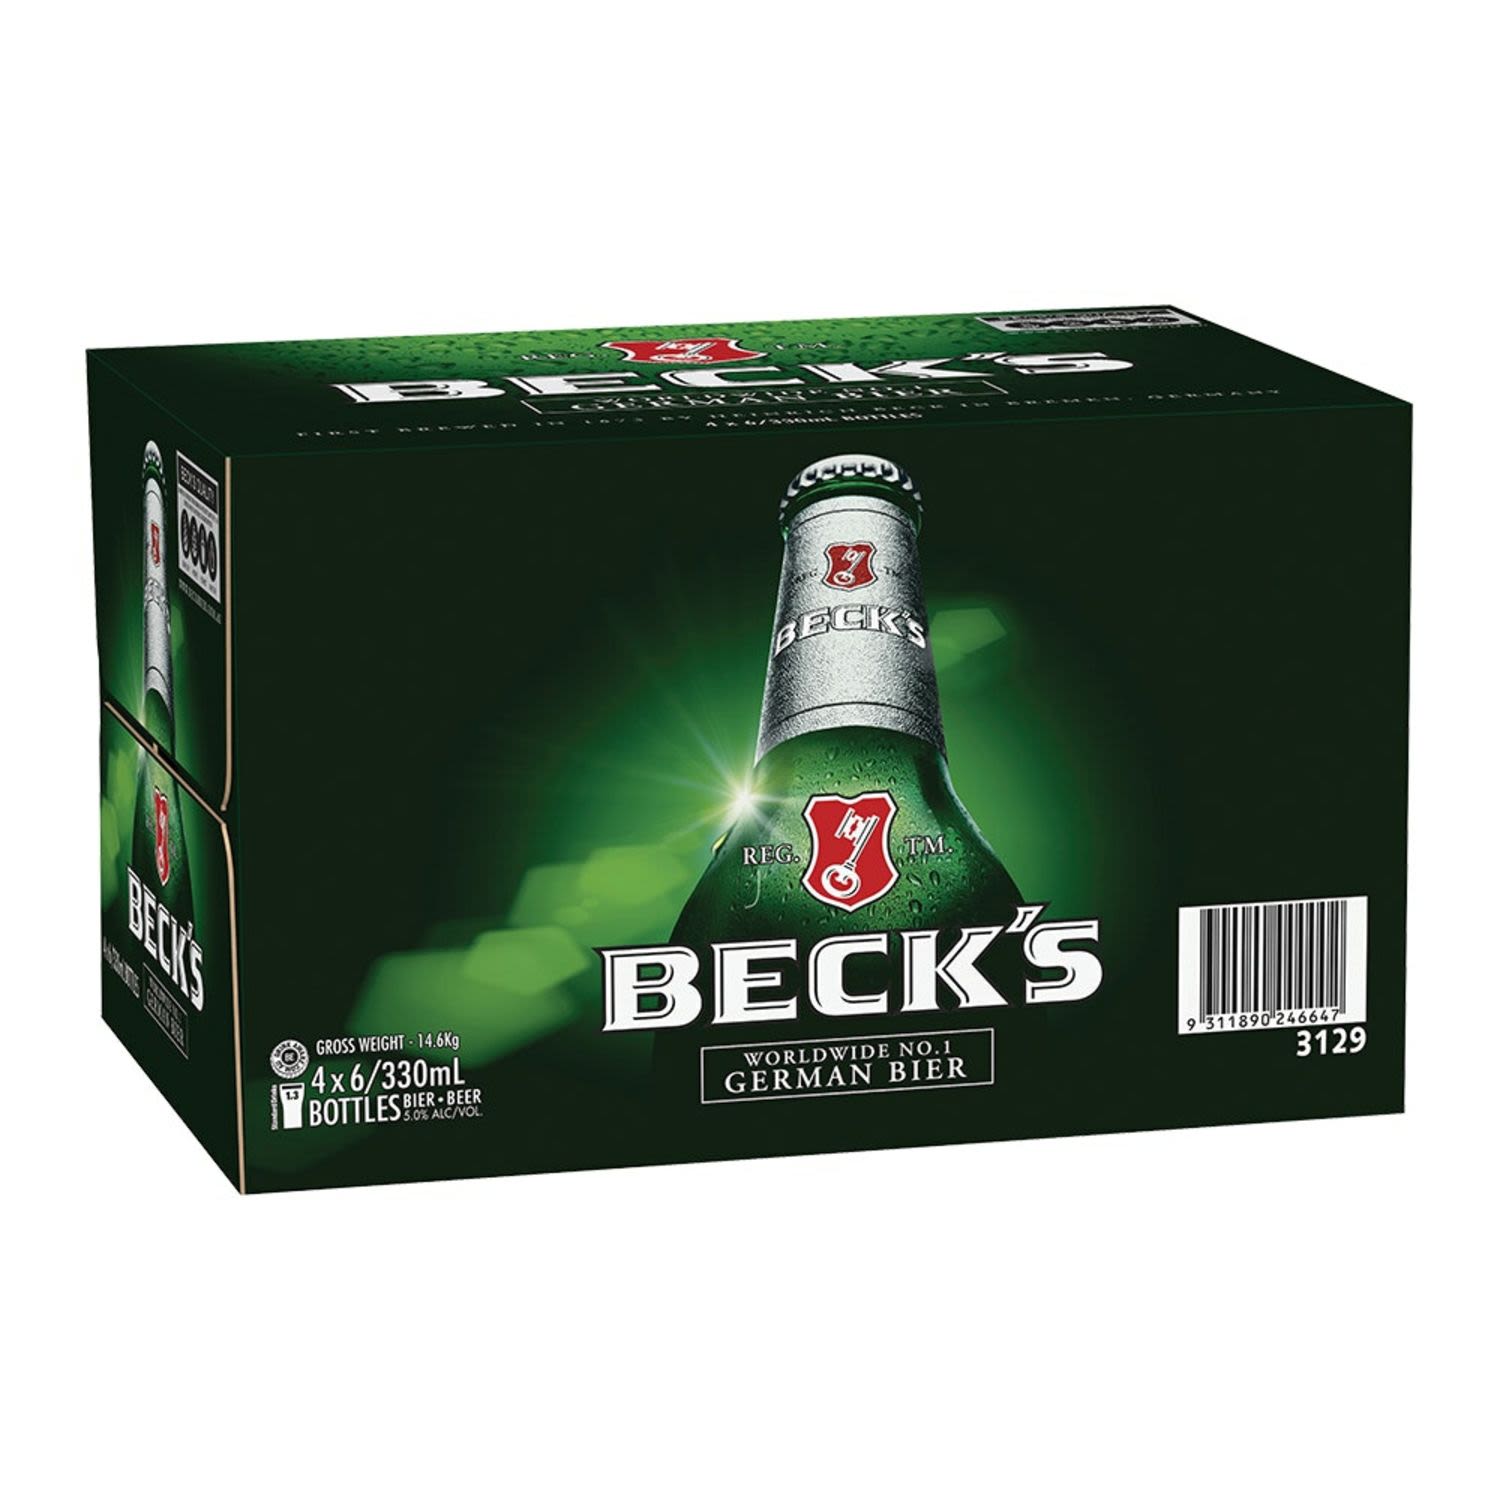 Beck's is a full-flavoured lager with a distinctive European malt taste. Known for it's refreshing and vibrant palate, a style that dates back many centuries. Beck's is best enjoyed with great friends and warm afternoons.<br /> <br />Alcohol Volume: 5.00%<br /><br />Pack Format: 24 Pack<br /><br />Standard Drinks: 1.3</br /><br />Pack Type: Bottle<br /><br />Country of Origin: Germany<br />